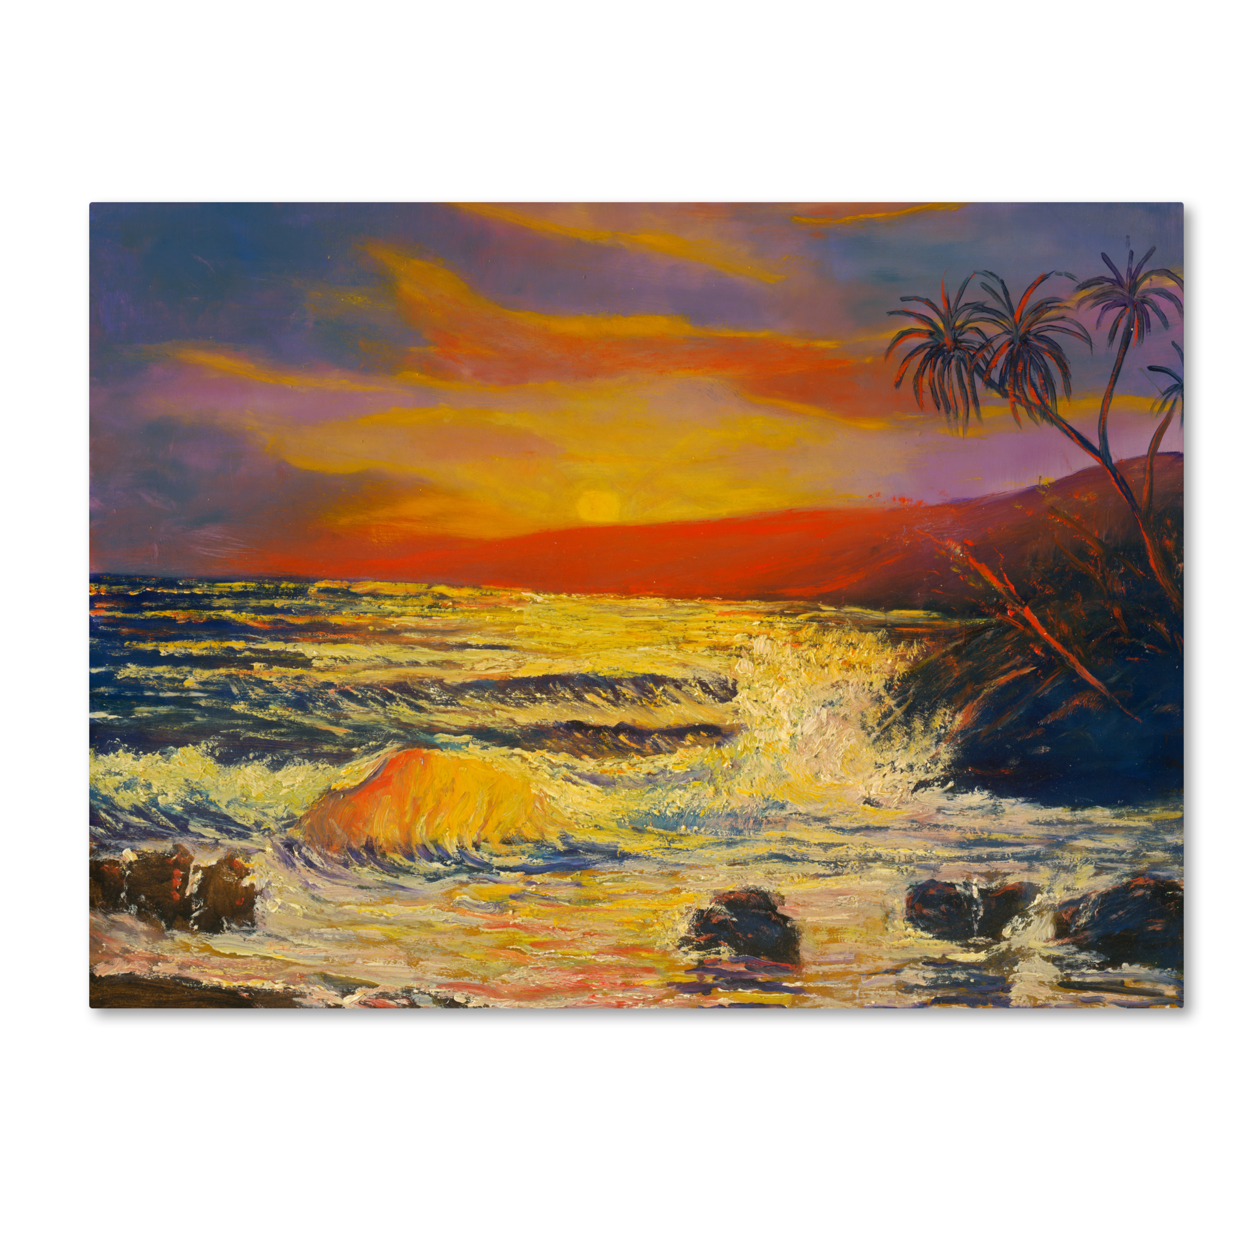 Manor Shadian 'Maui Sunset' Canvas Wall Art 35 X 47 Inches